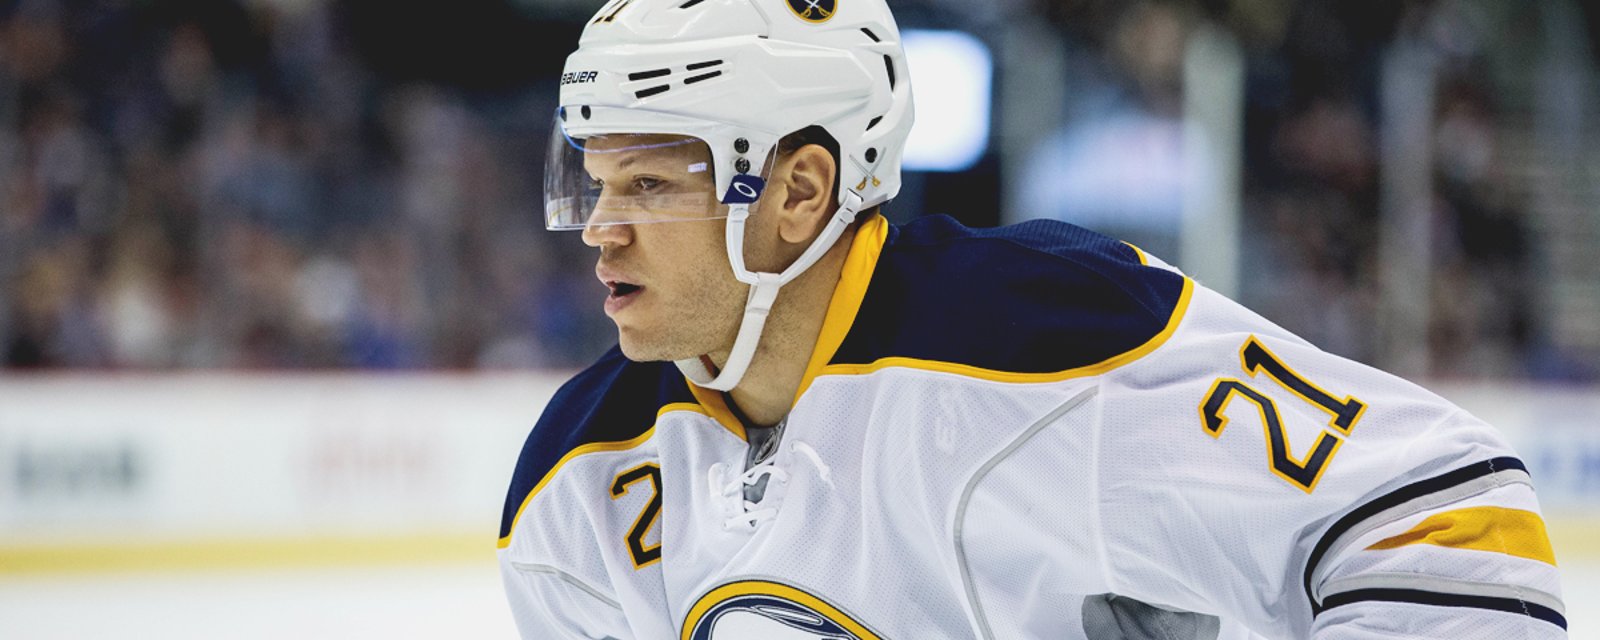 Sabres player confirms Kyle Okposo’s TRAGIC “disease” that kept him in a neuro intensive care.